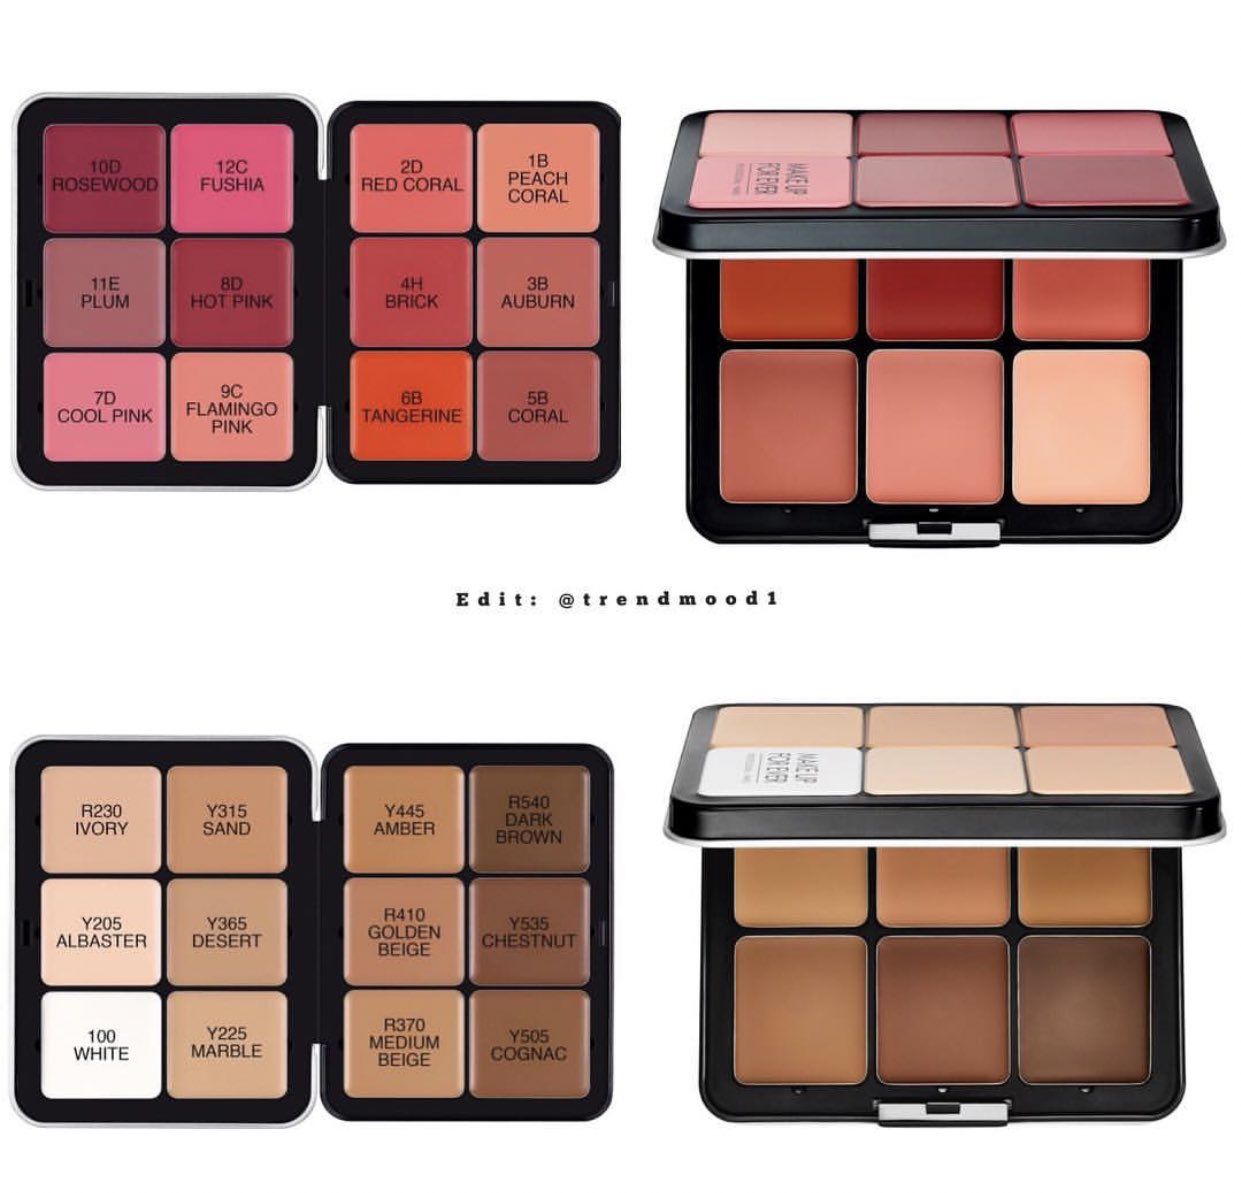 Trendmood on Twitter: "Available 🚨 LINK ➡️ https://t.co/v6dcXbyBw4 online #Sephora ❤️ @MAKEUPFOREVERUS NEW! Palettes: 1. Ultra HD Cover Foundation Palette $110 - 12 shades of acclaimed Ultra HD